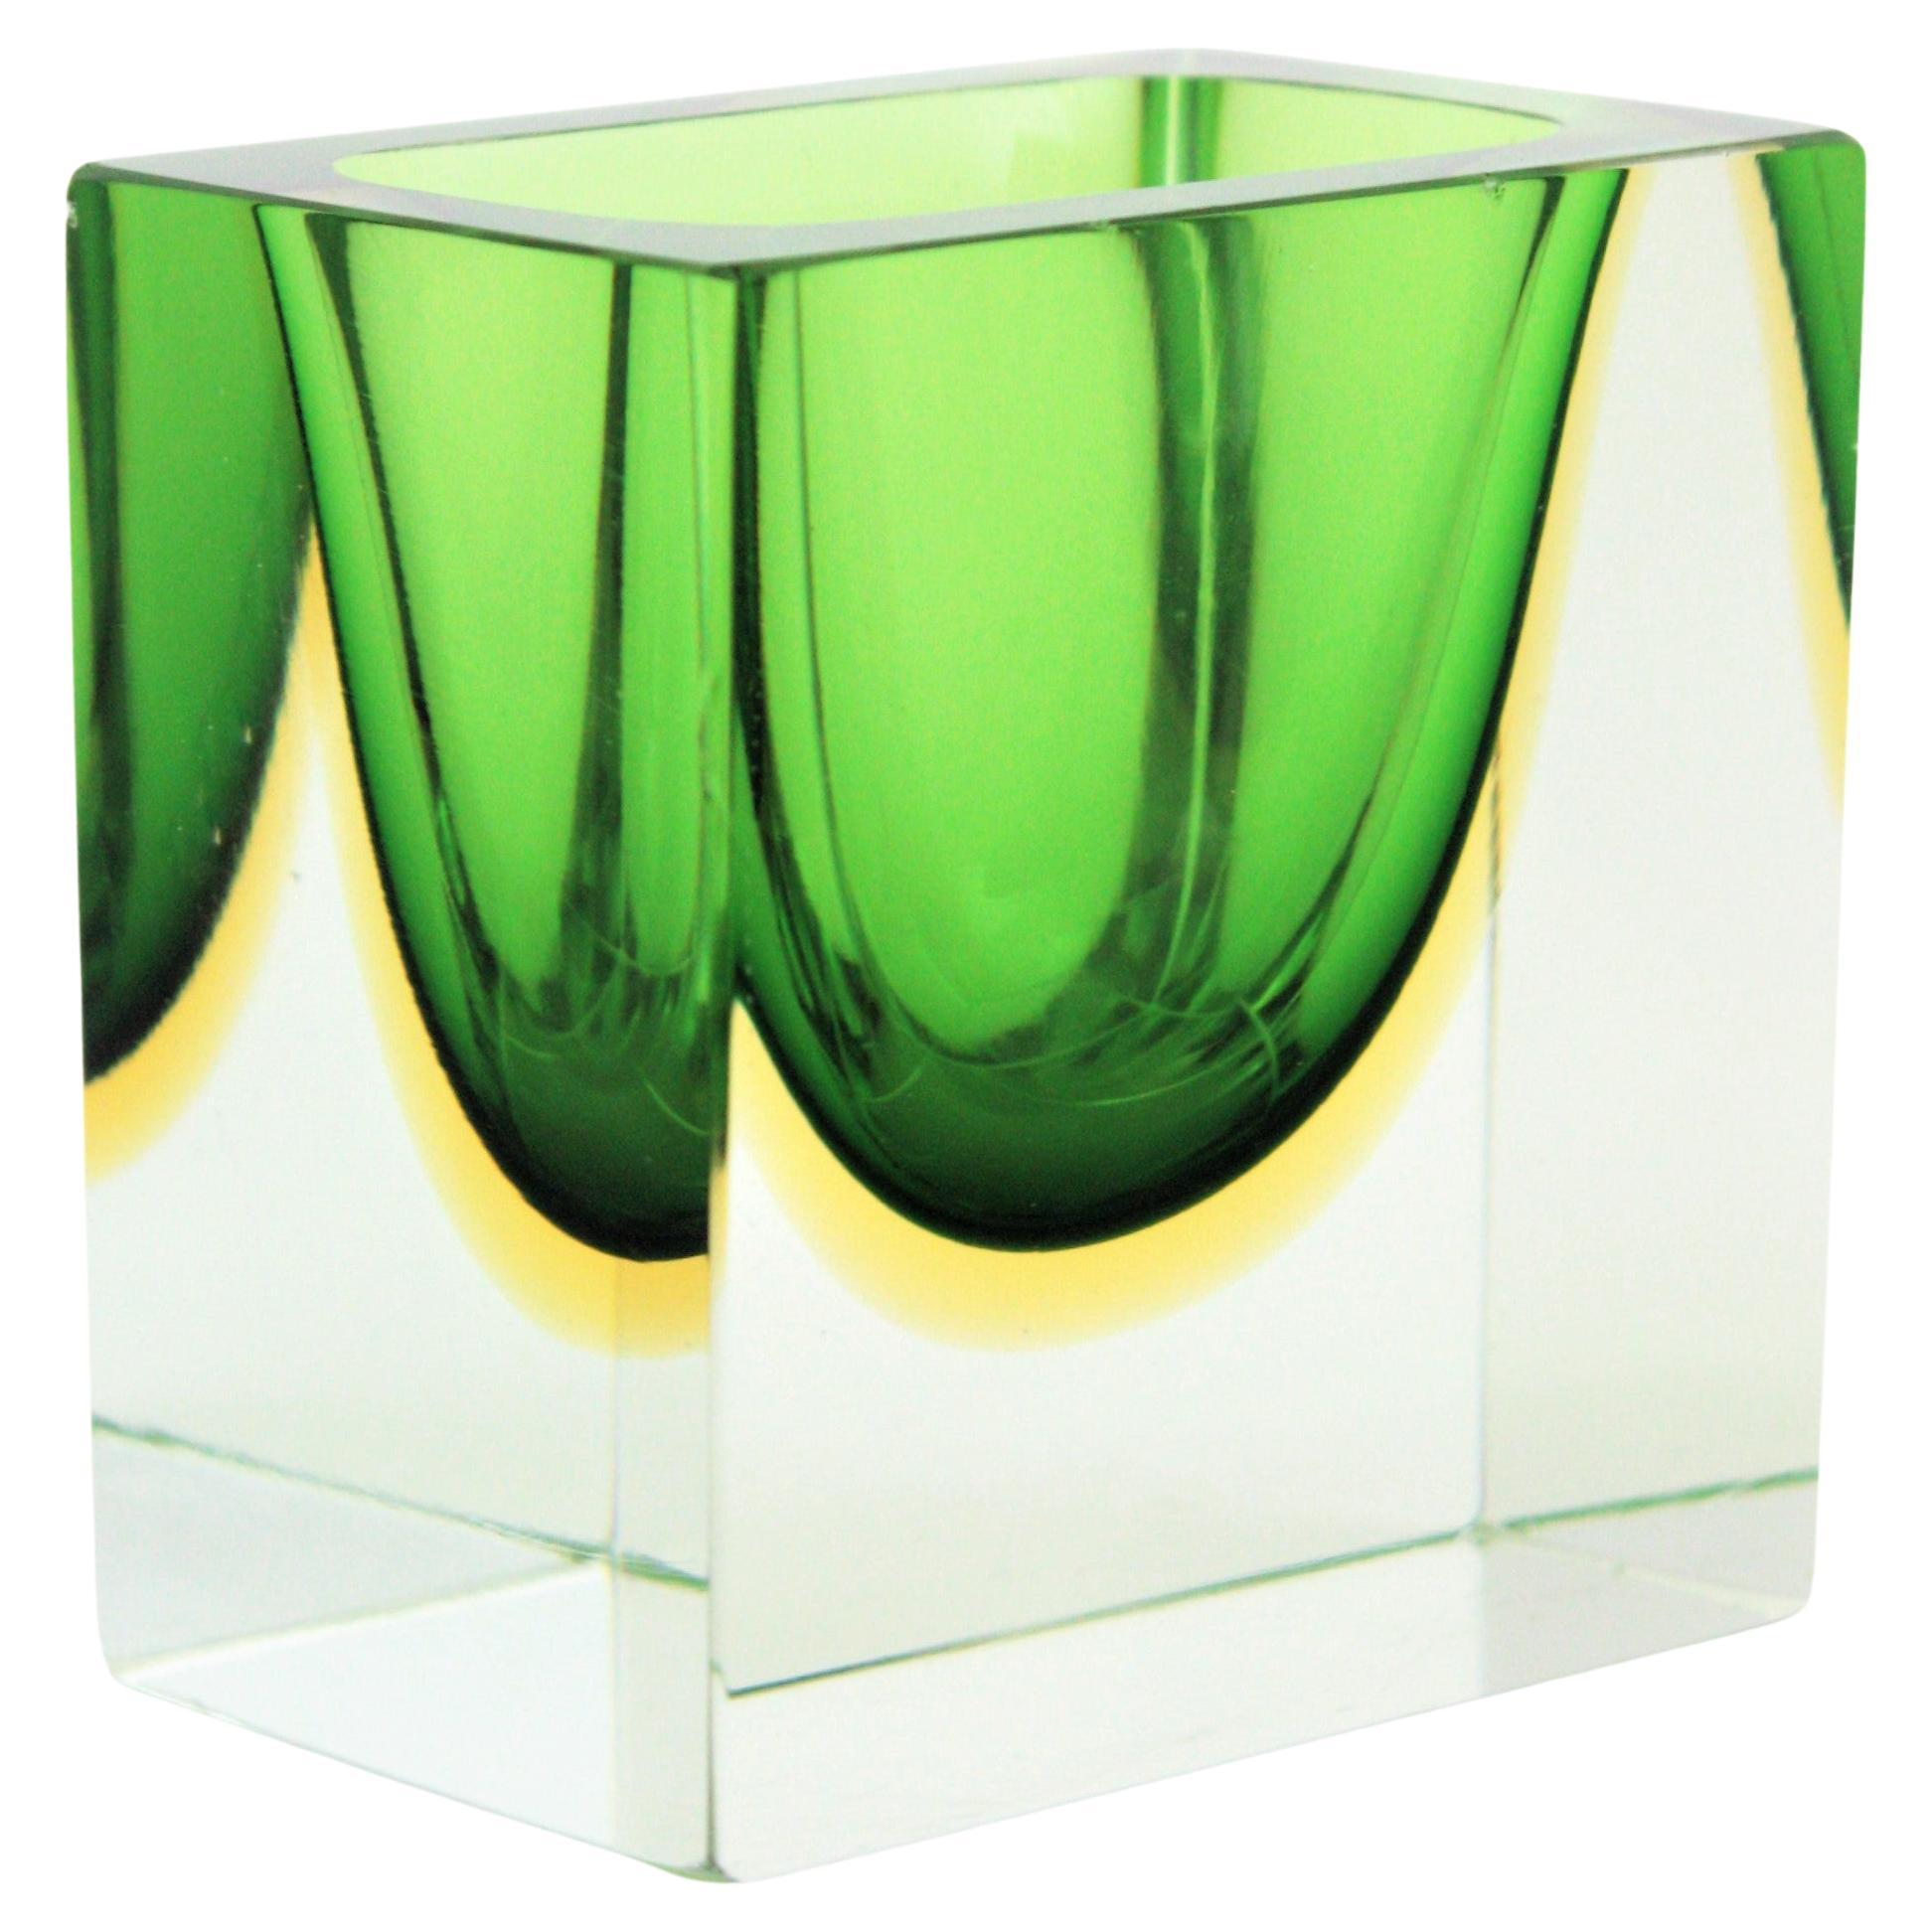 Faceted Sommerso square murano art glass block bowl. Attributed to Flavio Poli, Italy, 1950s.
Materials: Murano glass, Faceted.
Colors: Green, yellow, clear glass
Eye-catching squared block cut faceted bowl or ashtray in green and yellow color